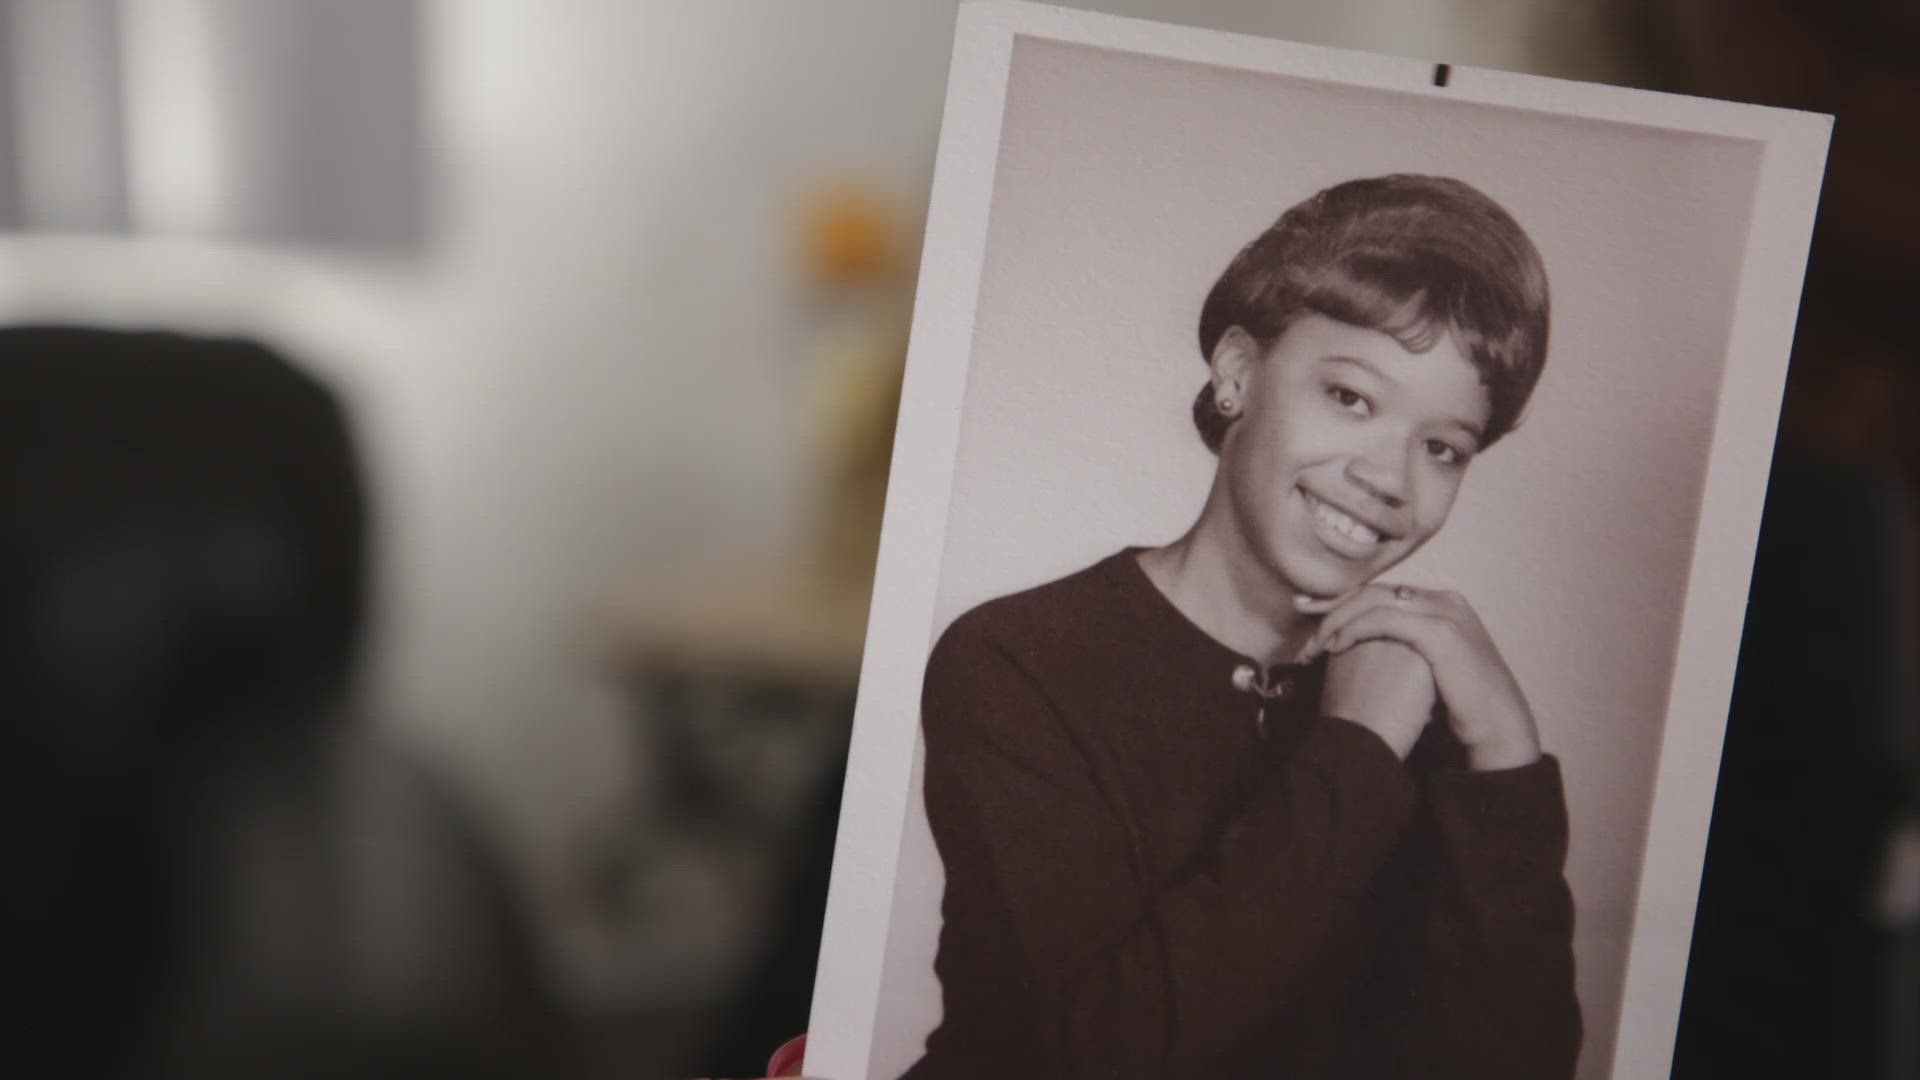 Stanley Anita Moore was killed in December 1971. Her family hopes for justice but learned that her case file is missing from the Denver Police Department.